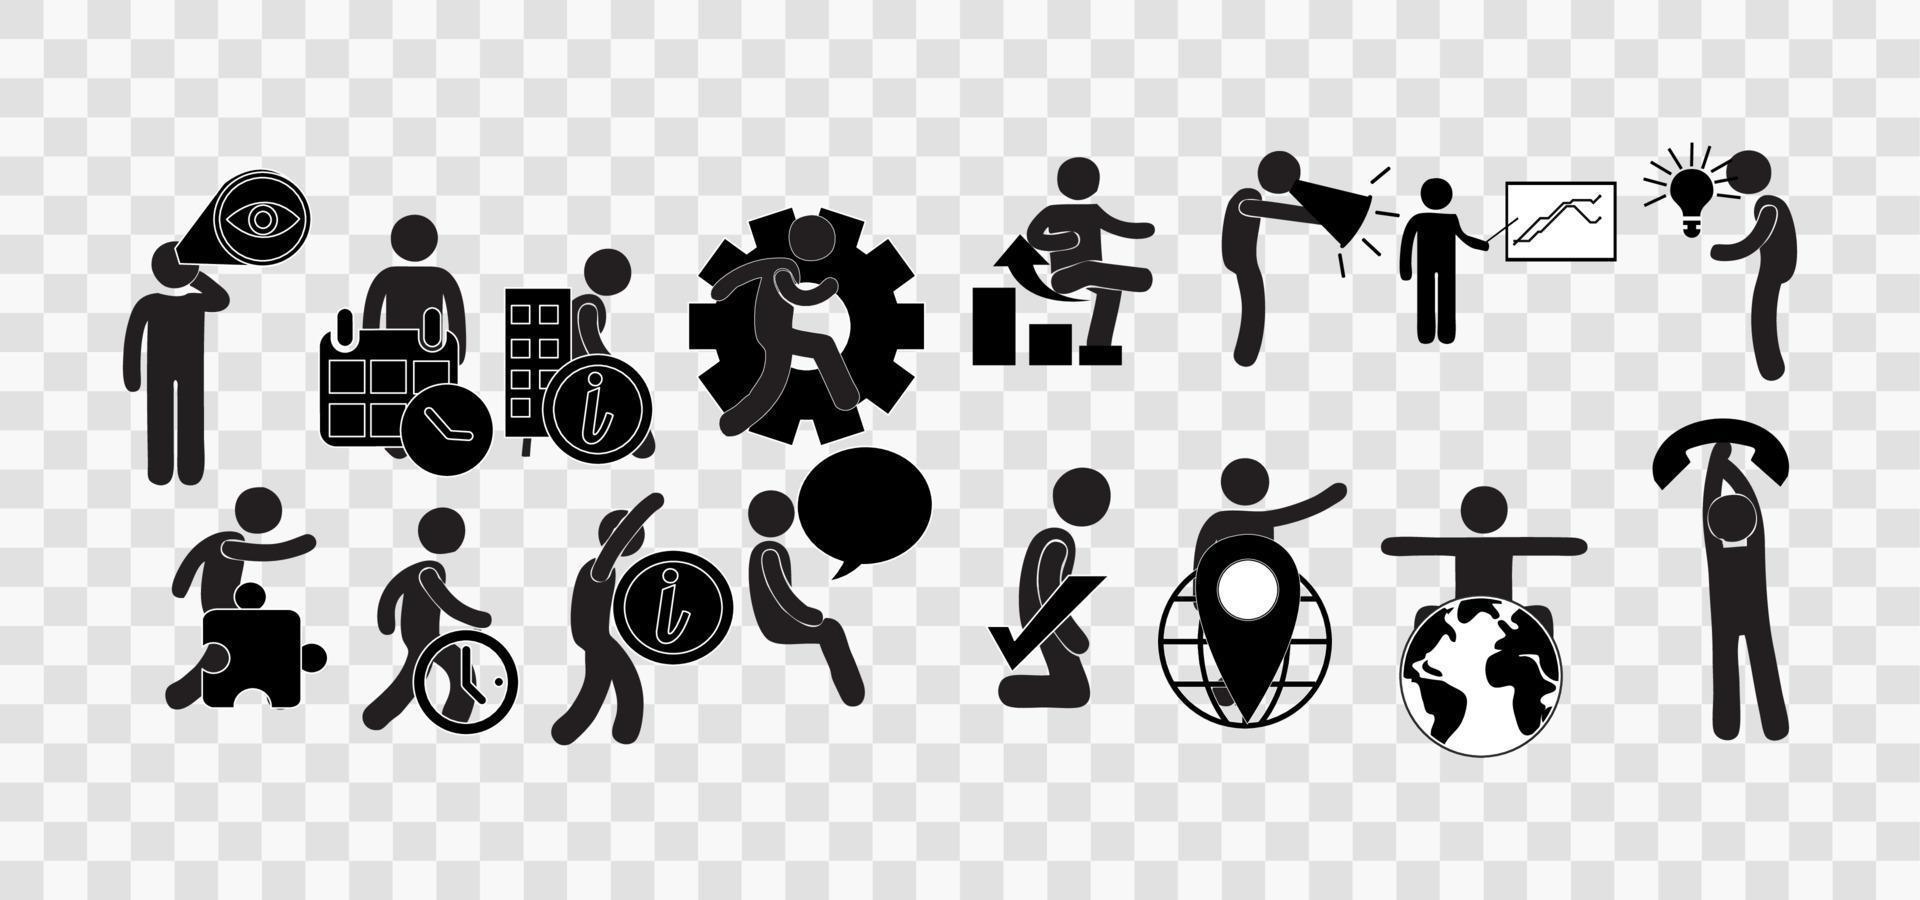 Collection of people pictograms vector